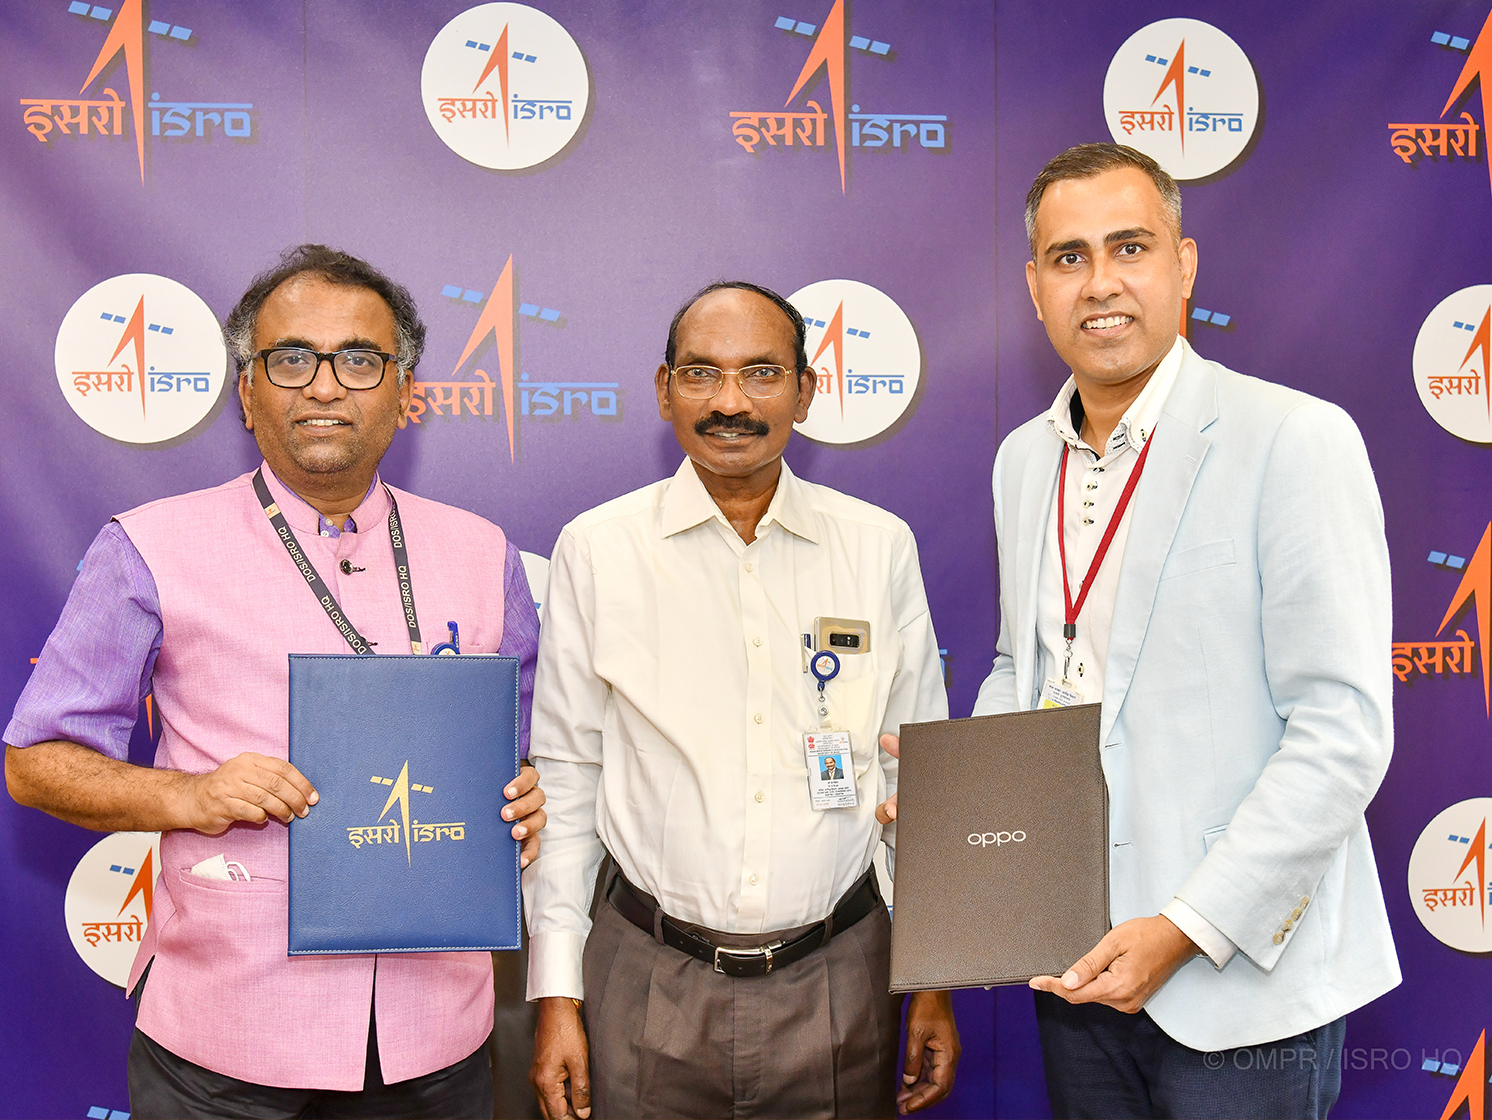 ISRO & OPPO India Collaborates To Provide NavIC Application, Paving Way For Atmanirbhar Bharat